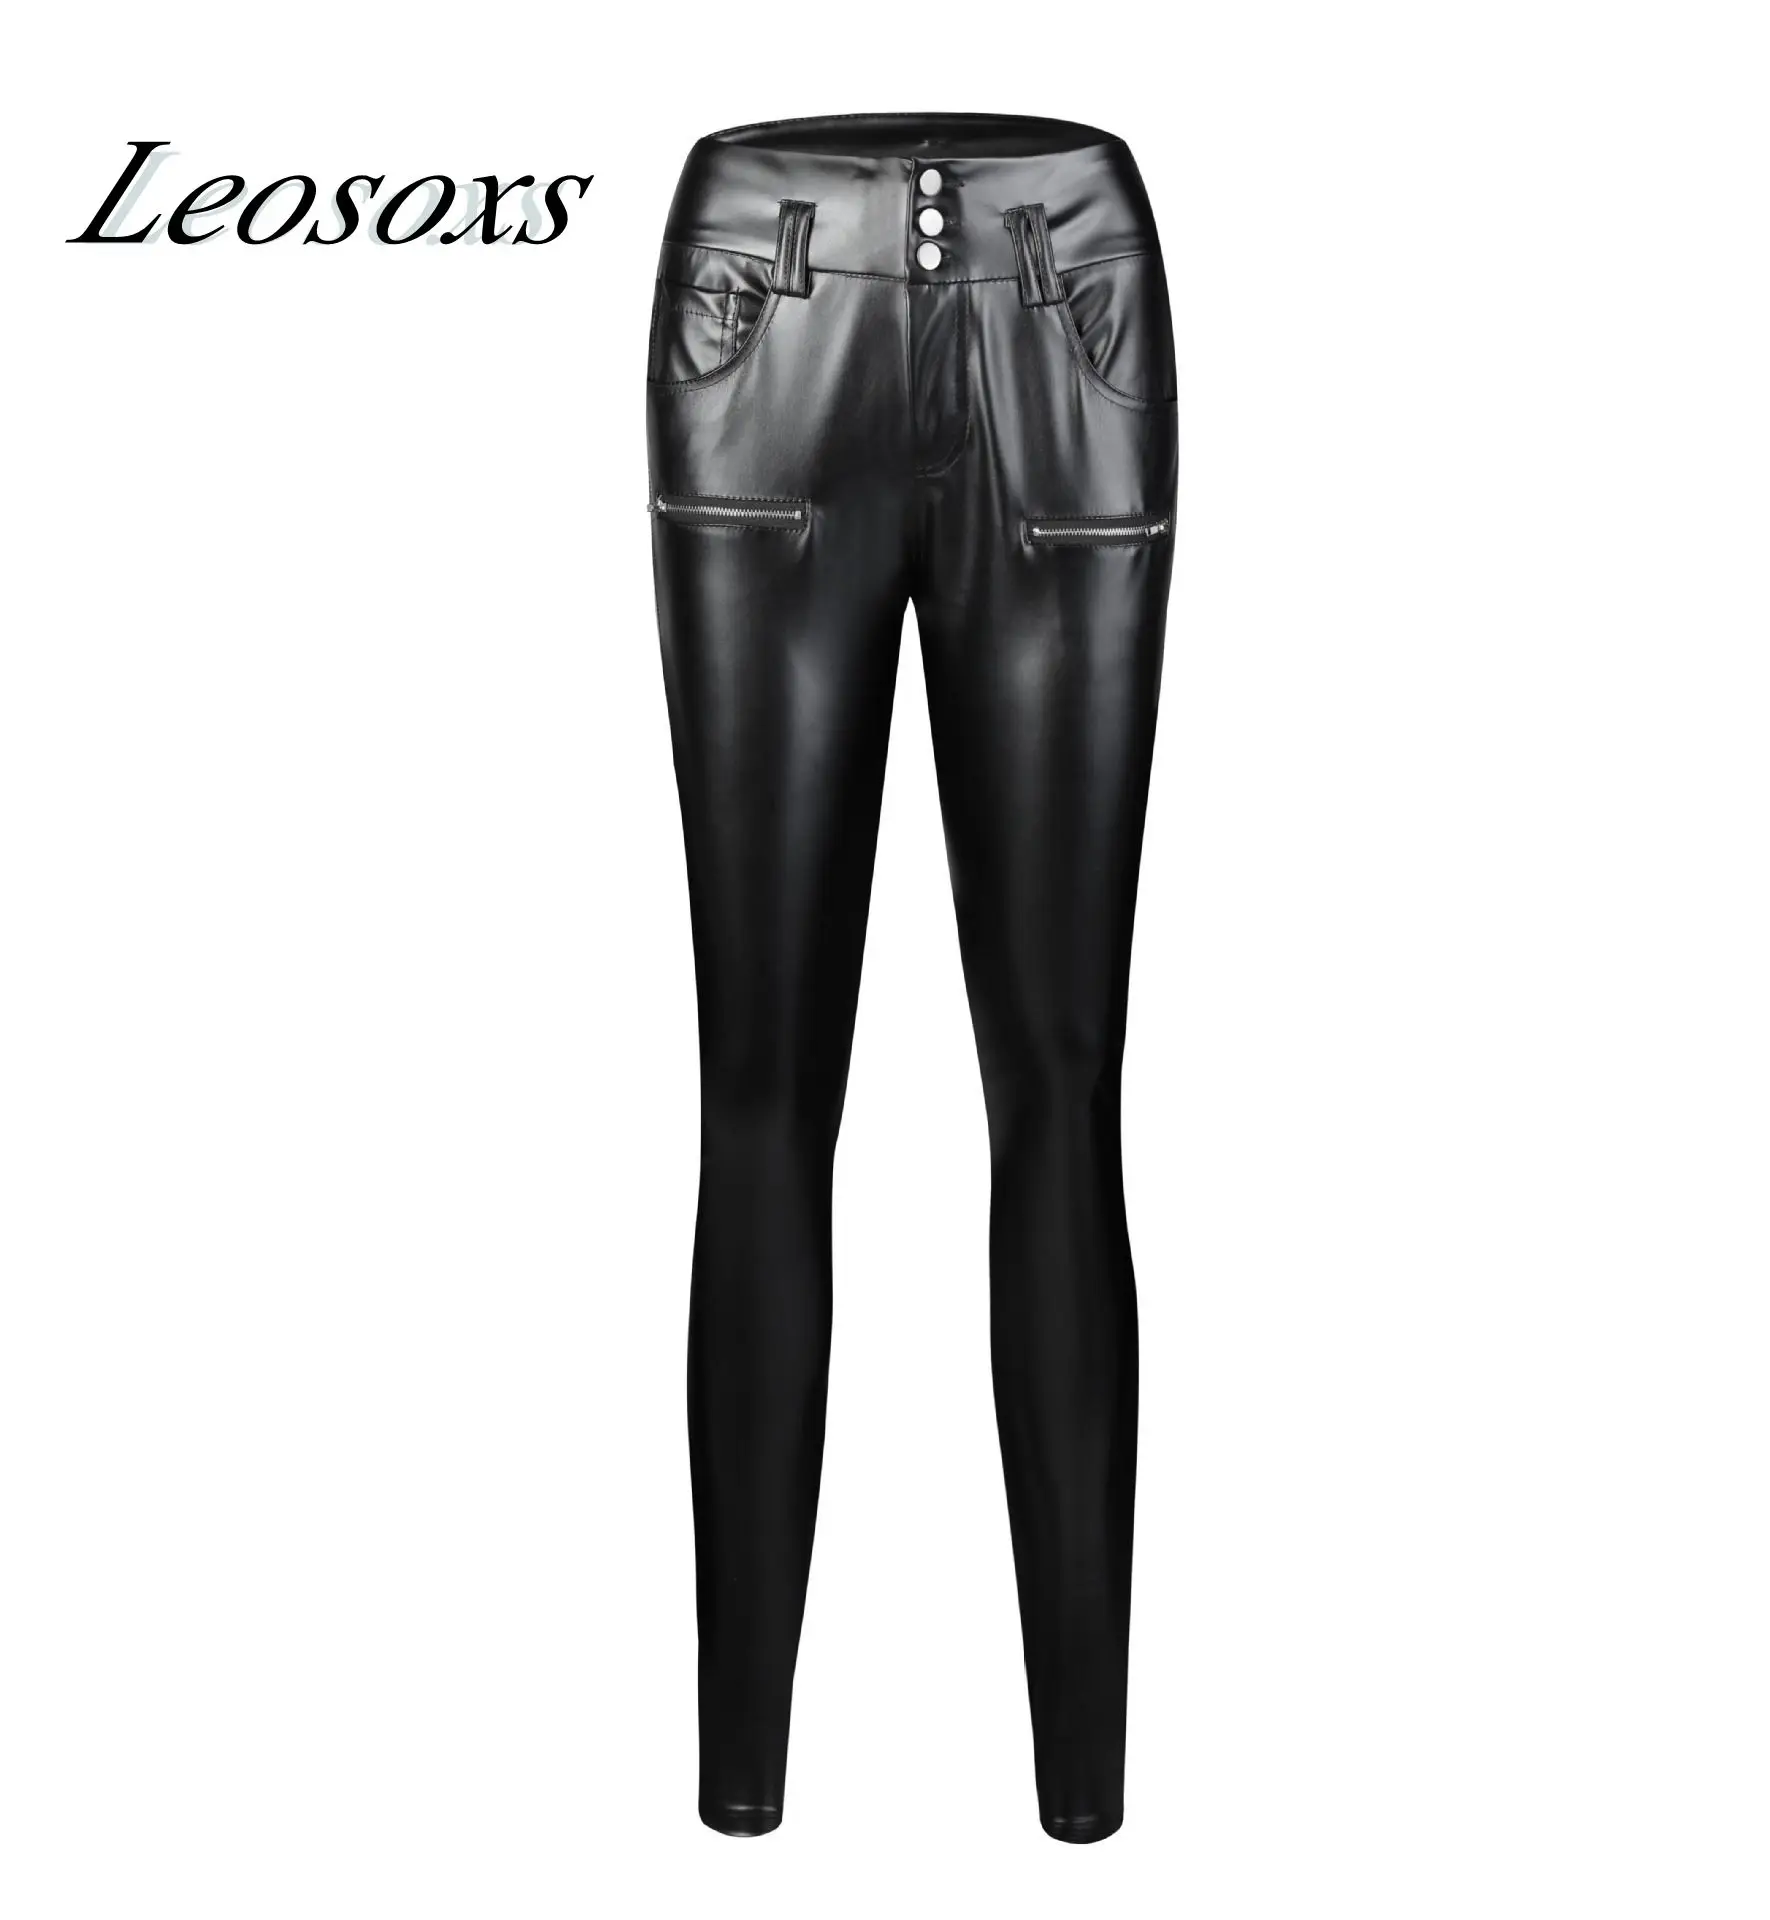 

2021Faux Leather matte leather pants Stretchy High Waist Sexy Elastic Thin Black Women Leggings PU Skinny Elastic Jeggings бѬки